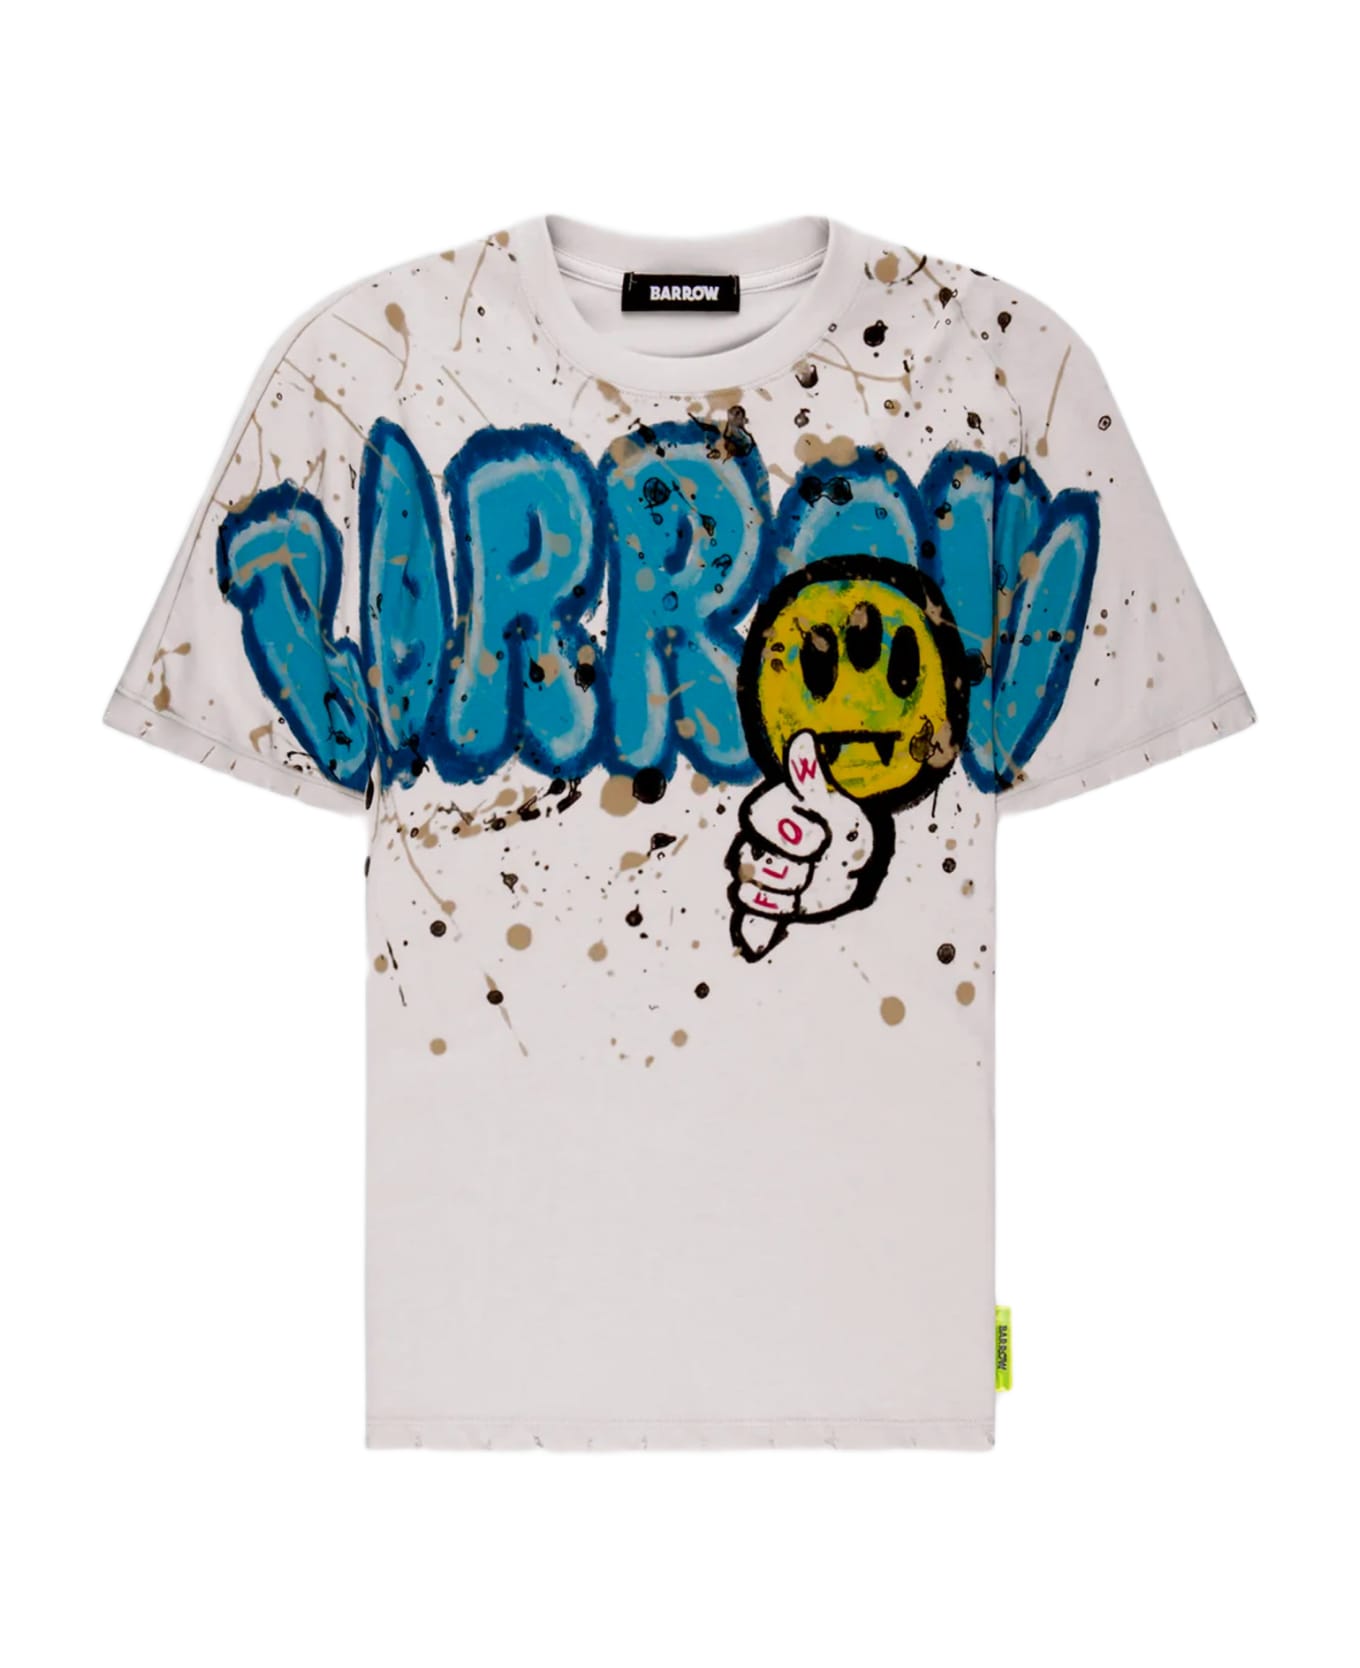 Barrow Jersey T-shirt Unisex Off White Cotton T-shirt With Graffiti Logo And Smile Print - Bianco sporco